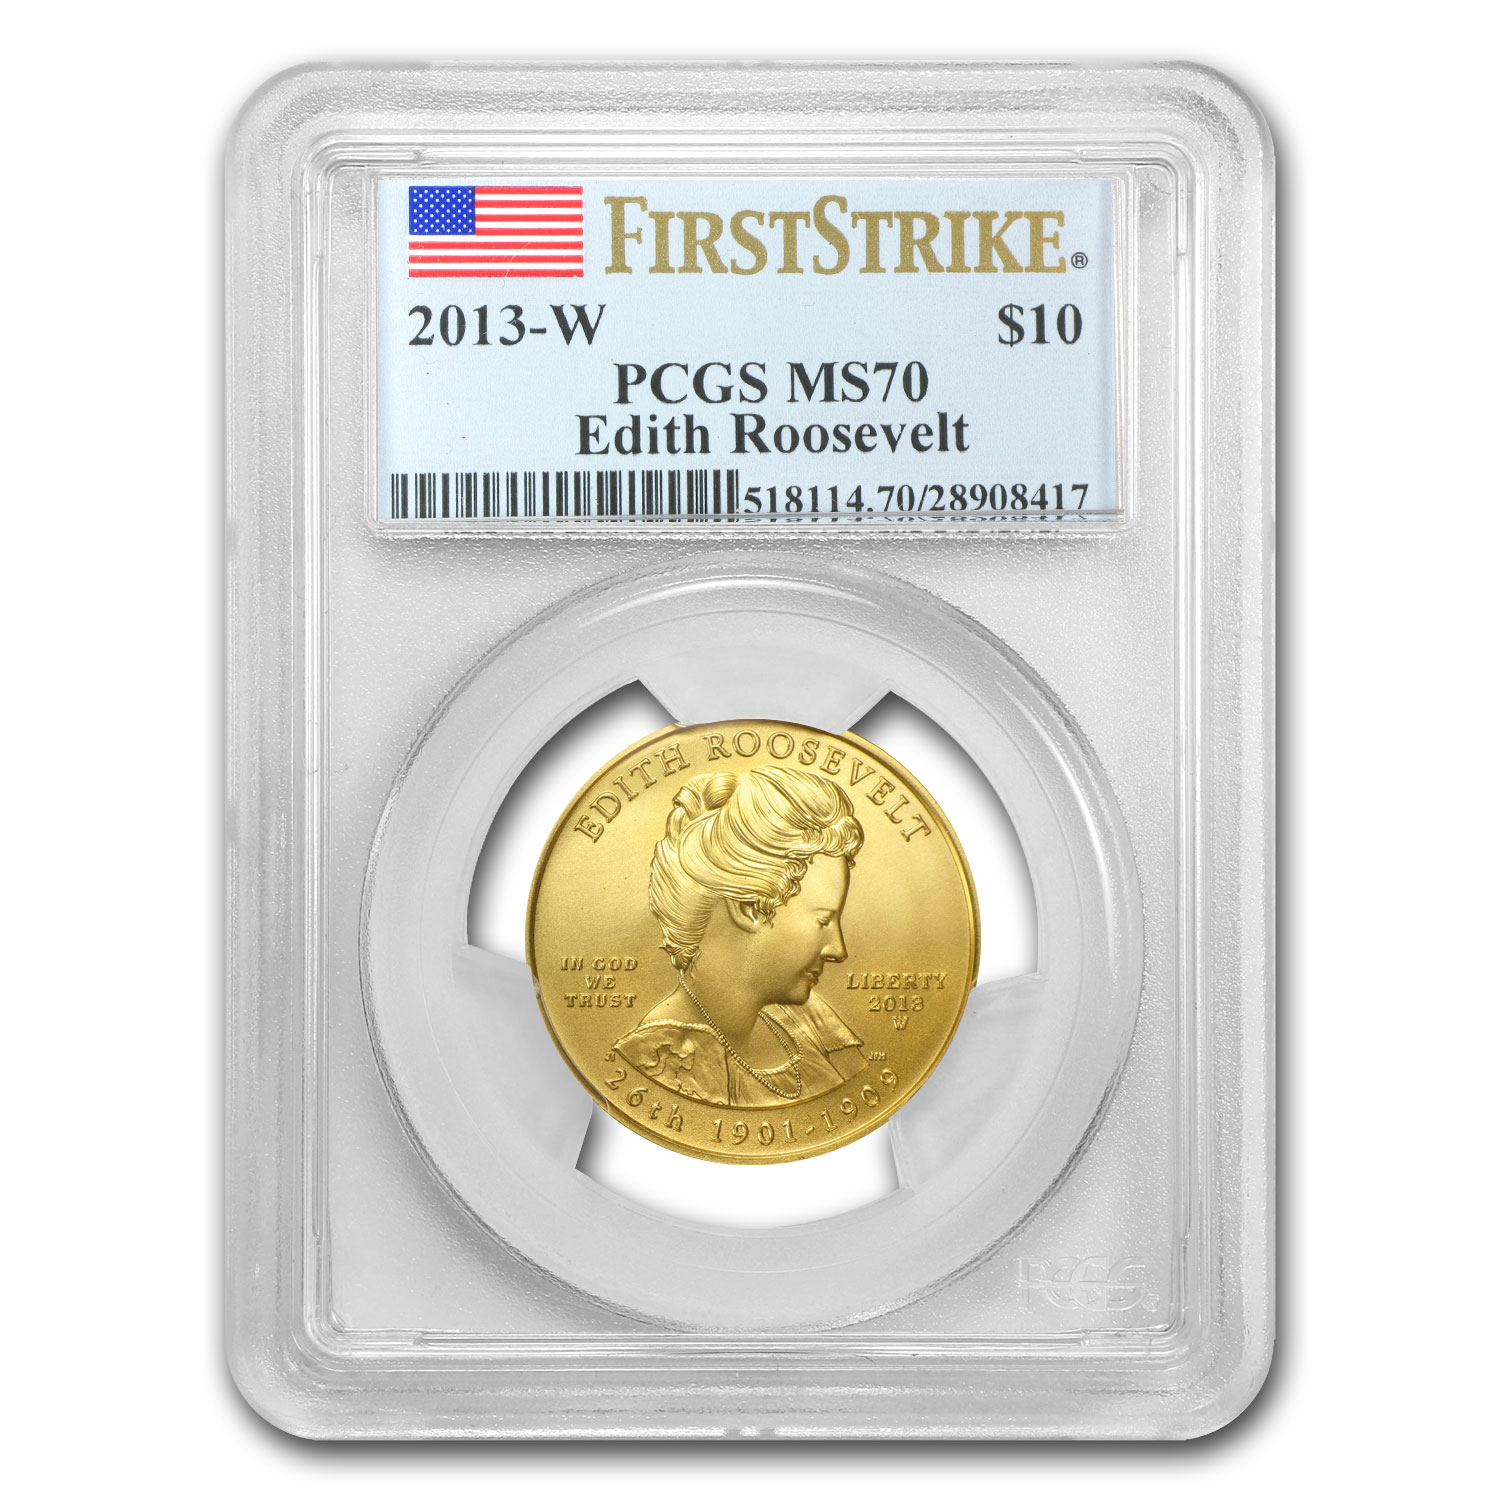 Buy 2013-W 1/2 oz Gold Edith Roosevelt MS-70 PCGS (FirstStrike?)